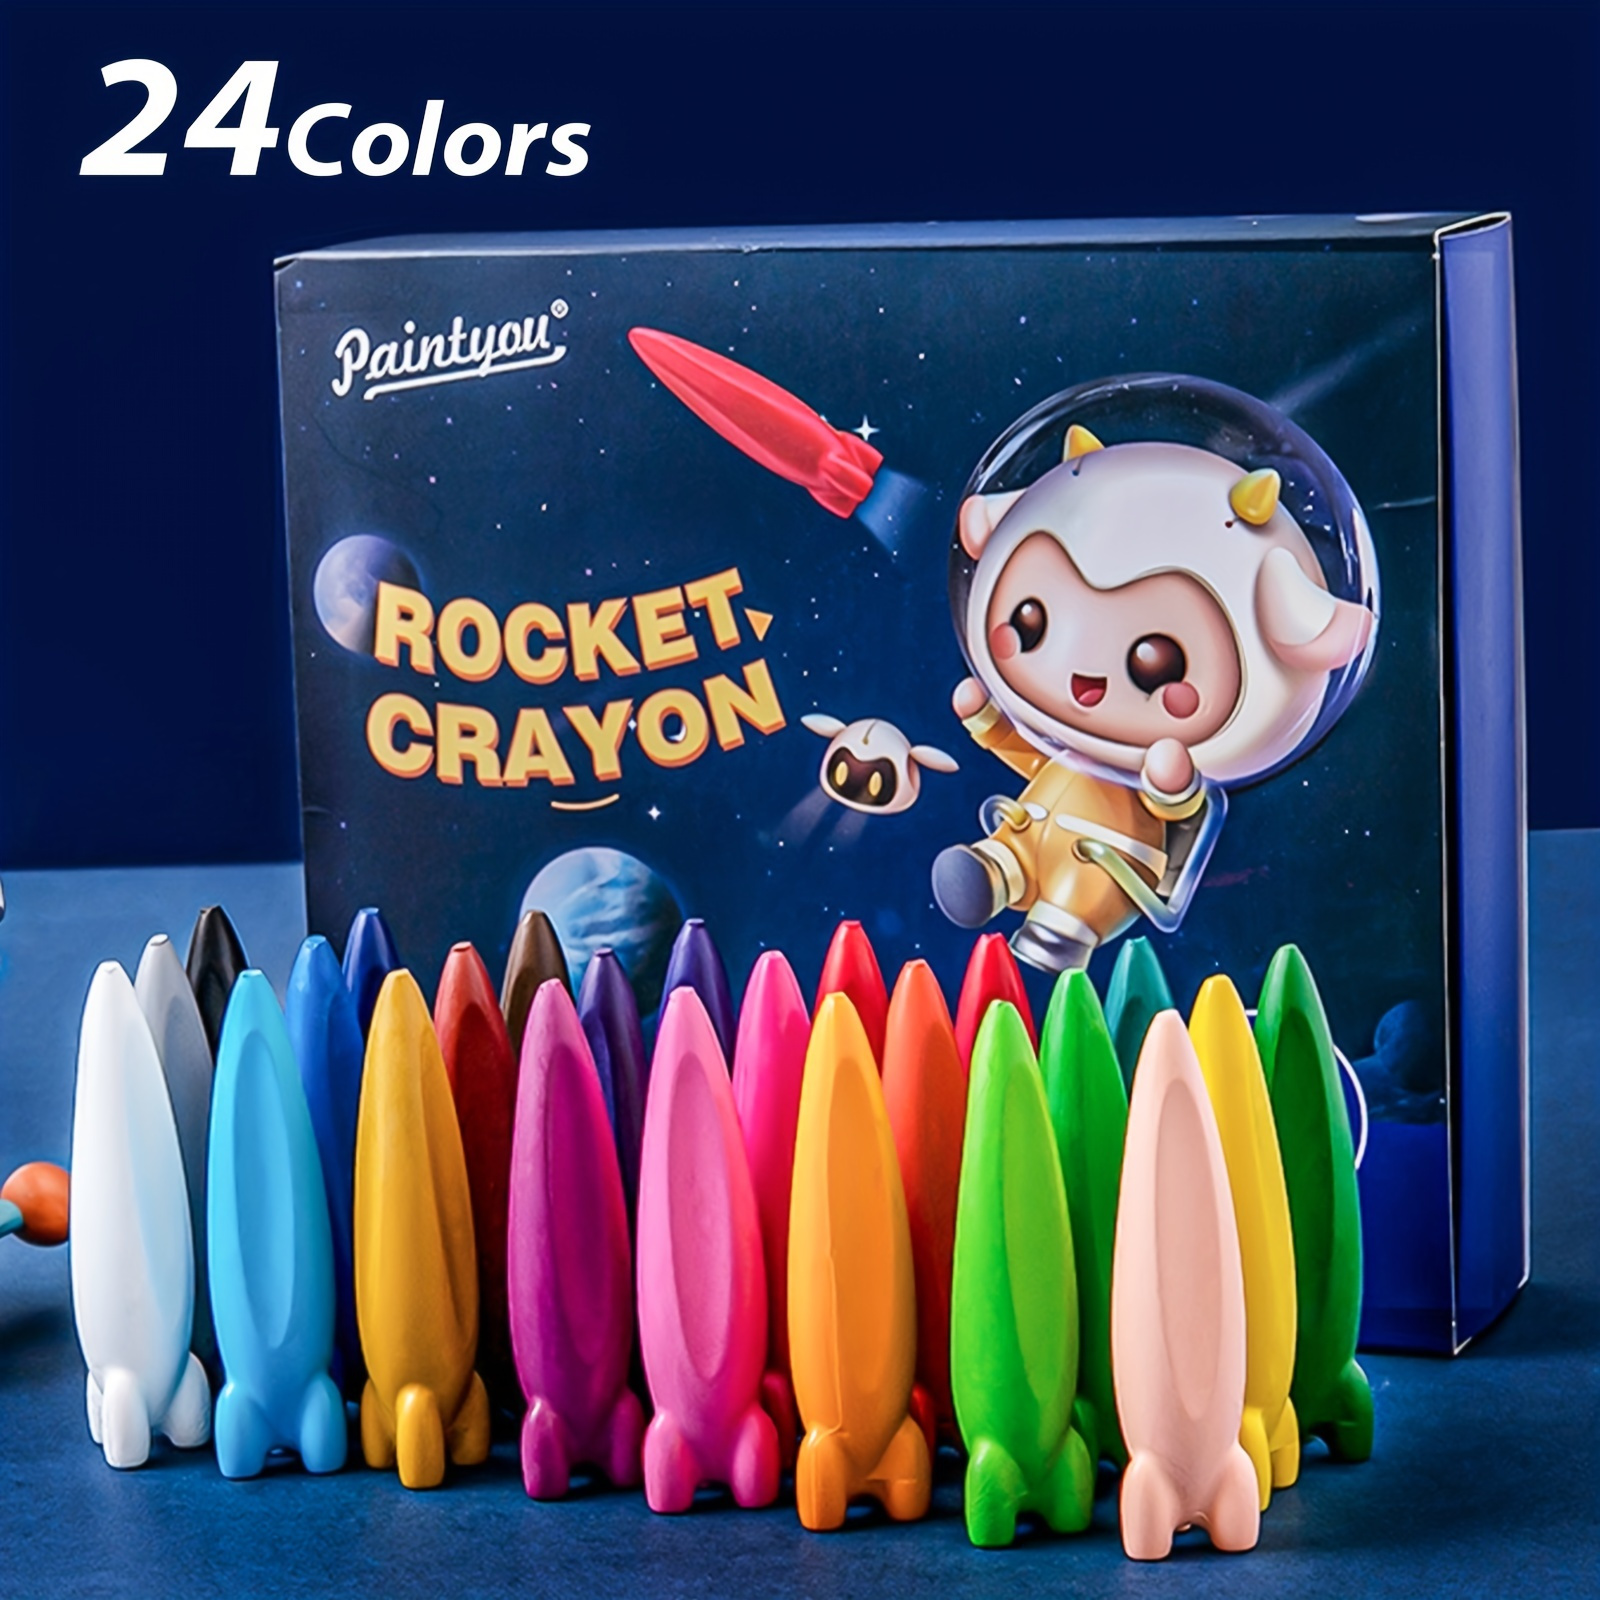 Peanut Crayons for Toddlers, 12 Colors Non-Toxic Crayons, Easy to